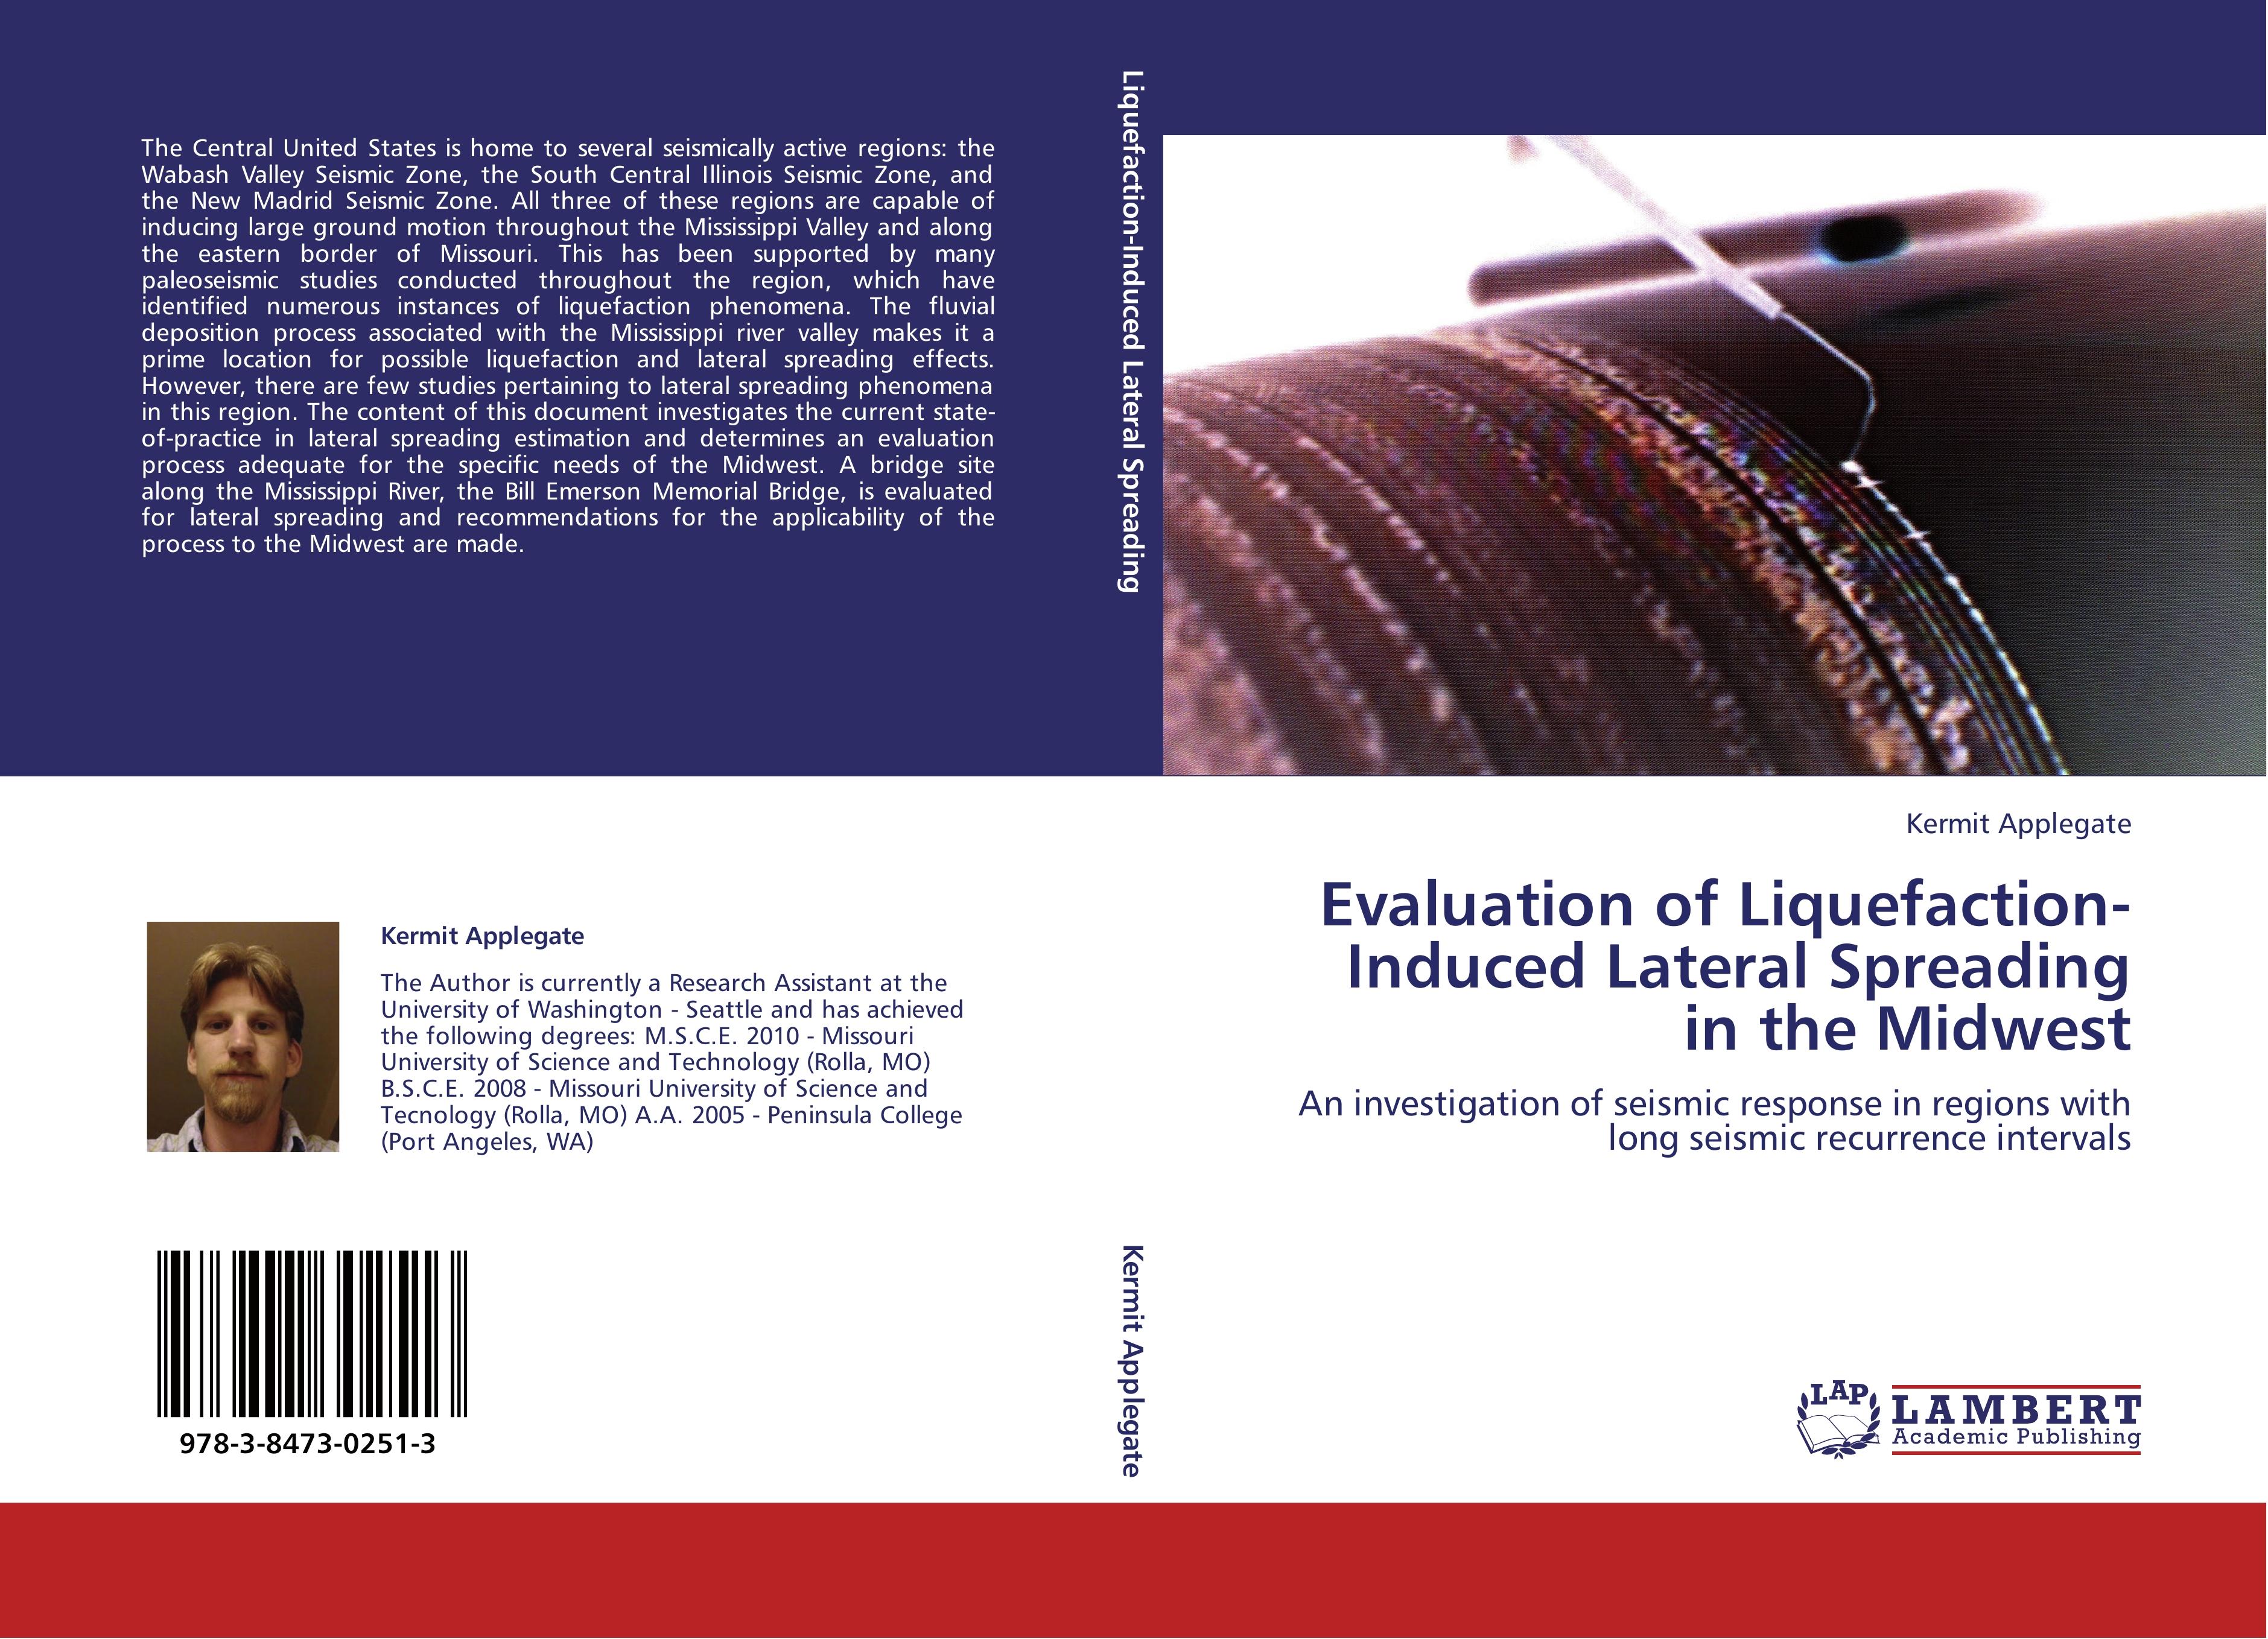 Evaluation of Liquefaction-Induced Lateral Spreading in the Midwest | An investigation of seismic response in regions with long seismic recurrence intervals | Kermit Applegate | Taschenbuch | 136 S. - Applegate, Kermit